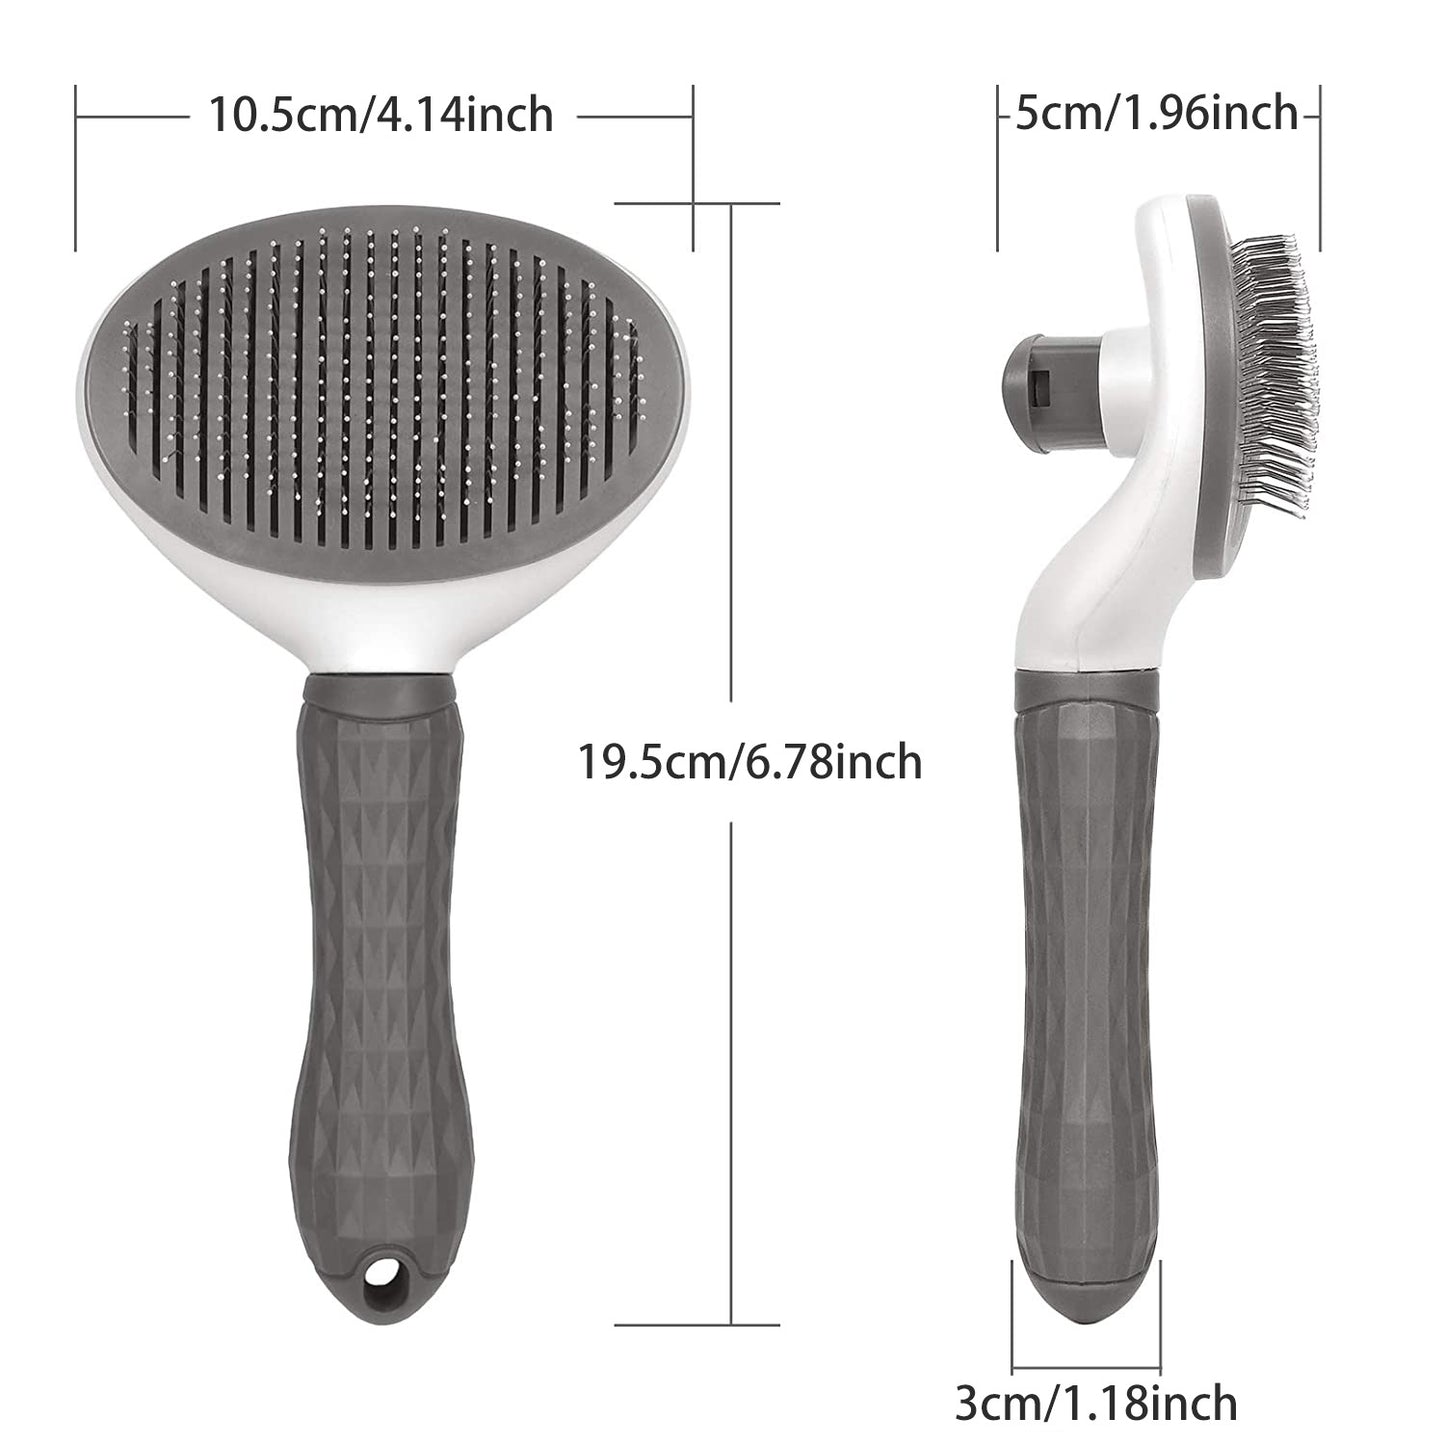 Pet Grooming Tool: Self-Cleaning Hair Remover Brush